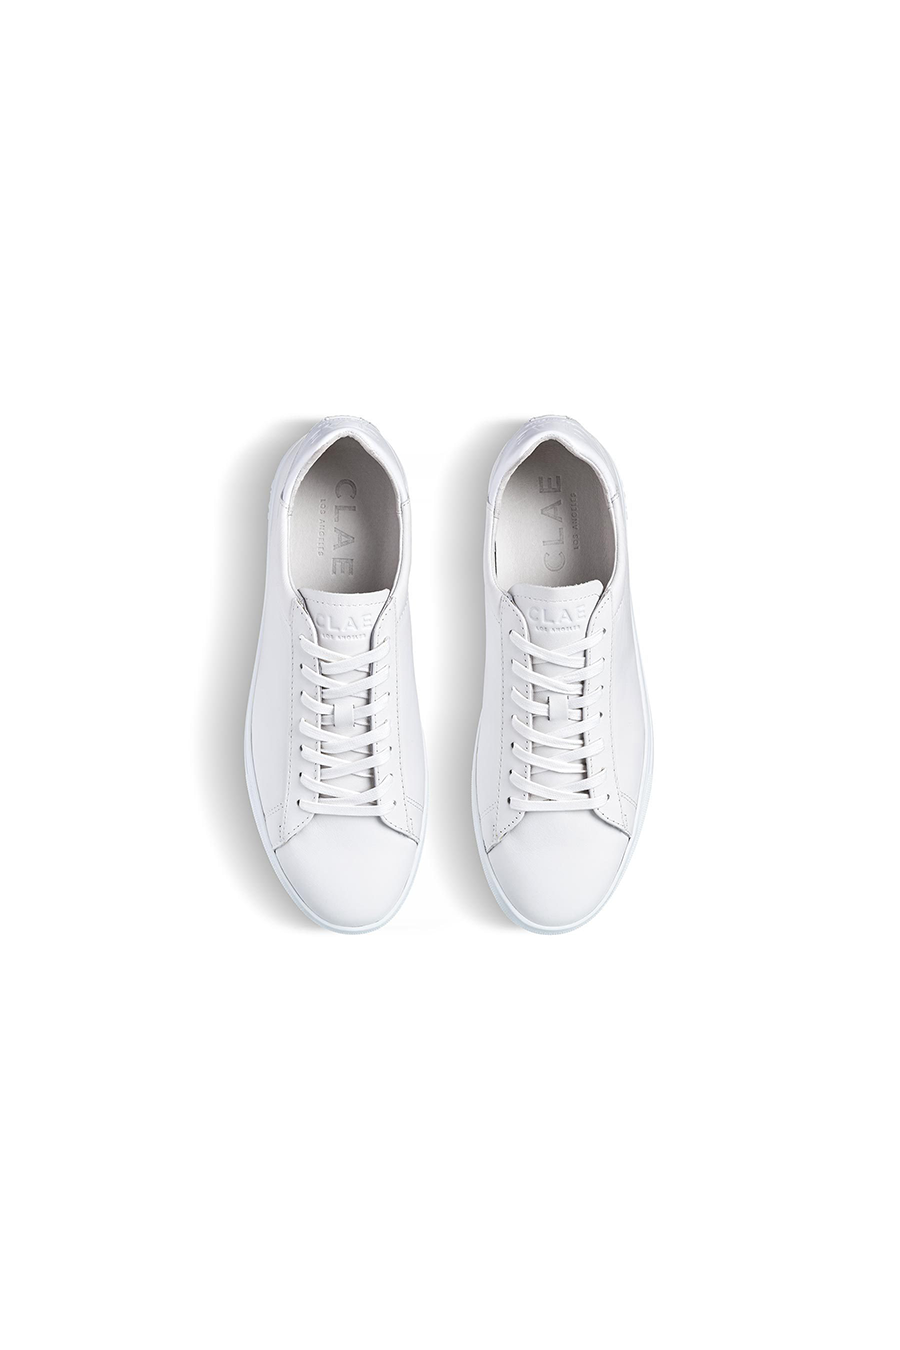 Bradley | Triple White Leather - Main Image Number 3 of 3